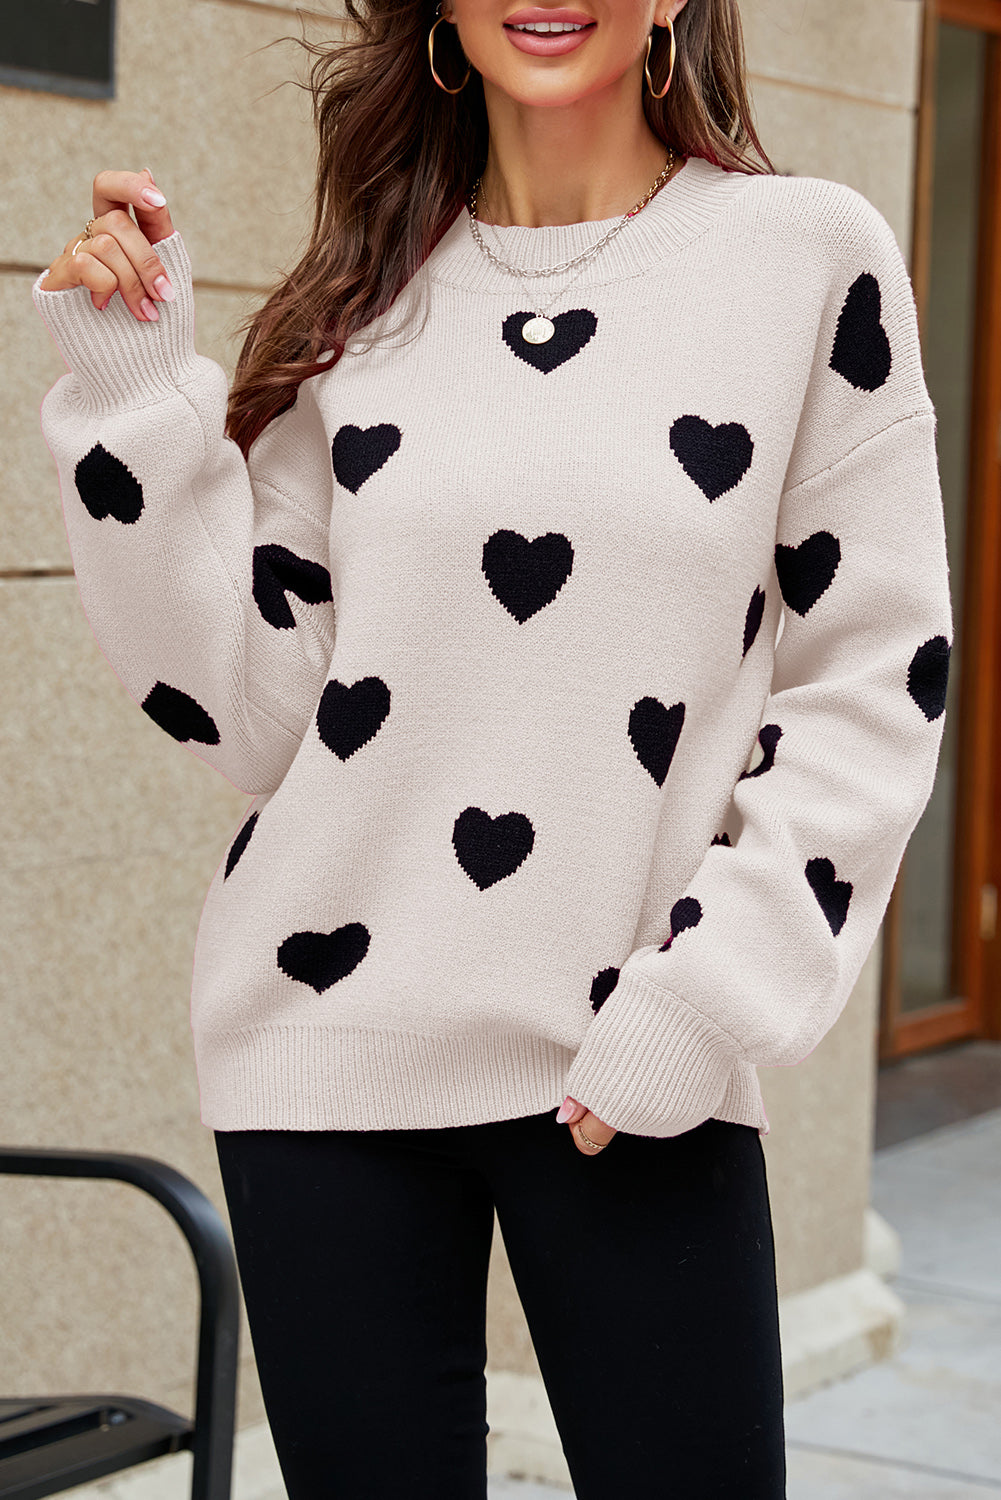 LC2722793-18-S, LC2722793-18-M, LC2722793-18-L, LC2722793-18-XL, Apricot Womens Heart Print Pullover Sweaters Valentine Tops